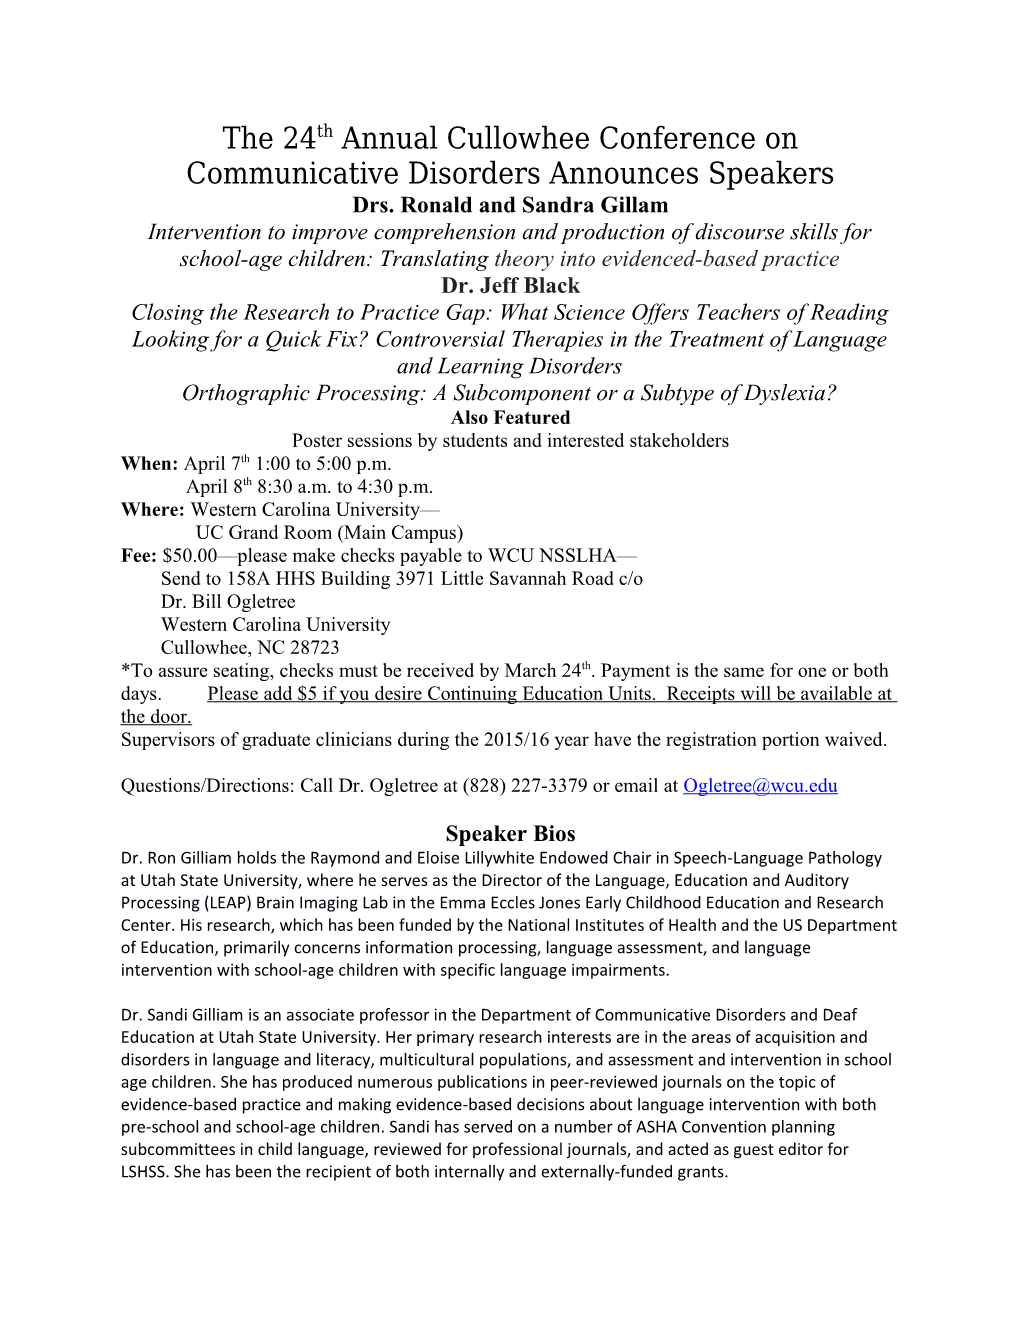 The 24Th Annual Cullowhee Conference on Communicative Disorders Announces Speakers